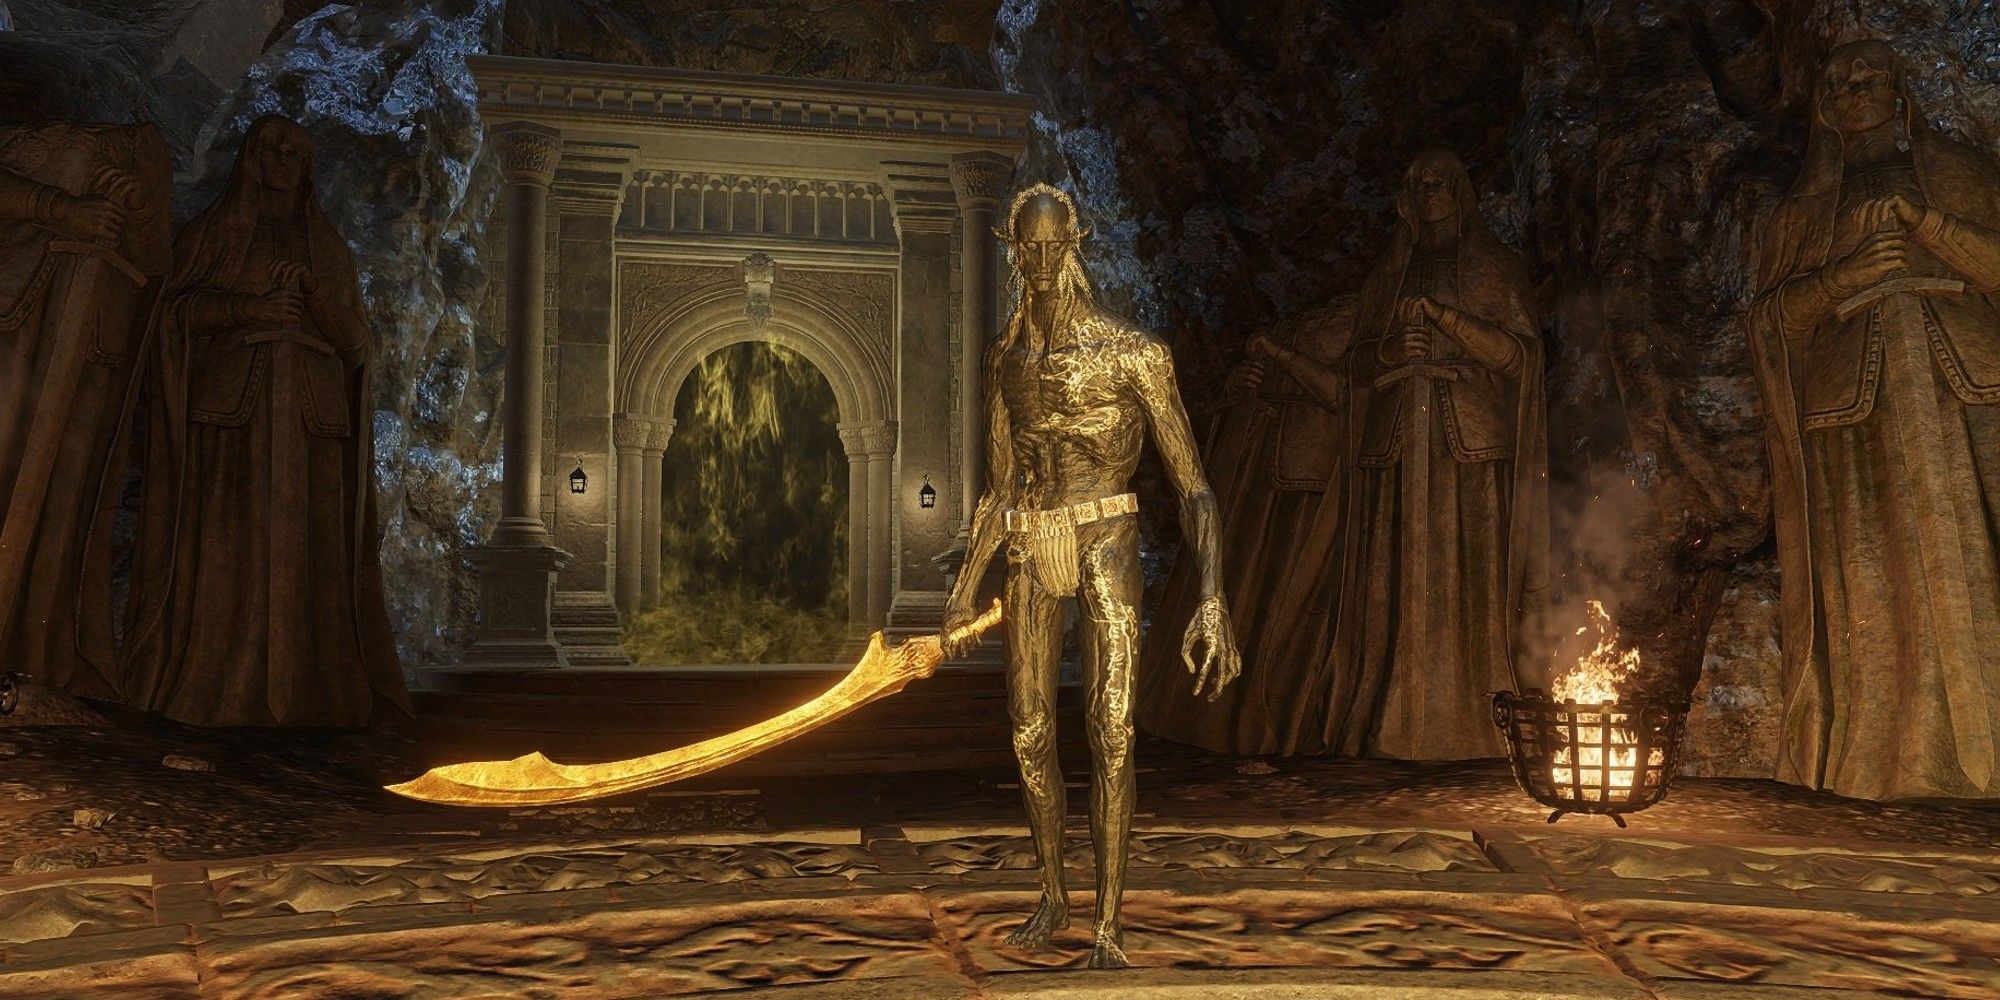 the onyx lord holding his greatsword